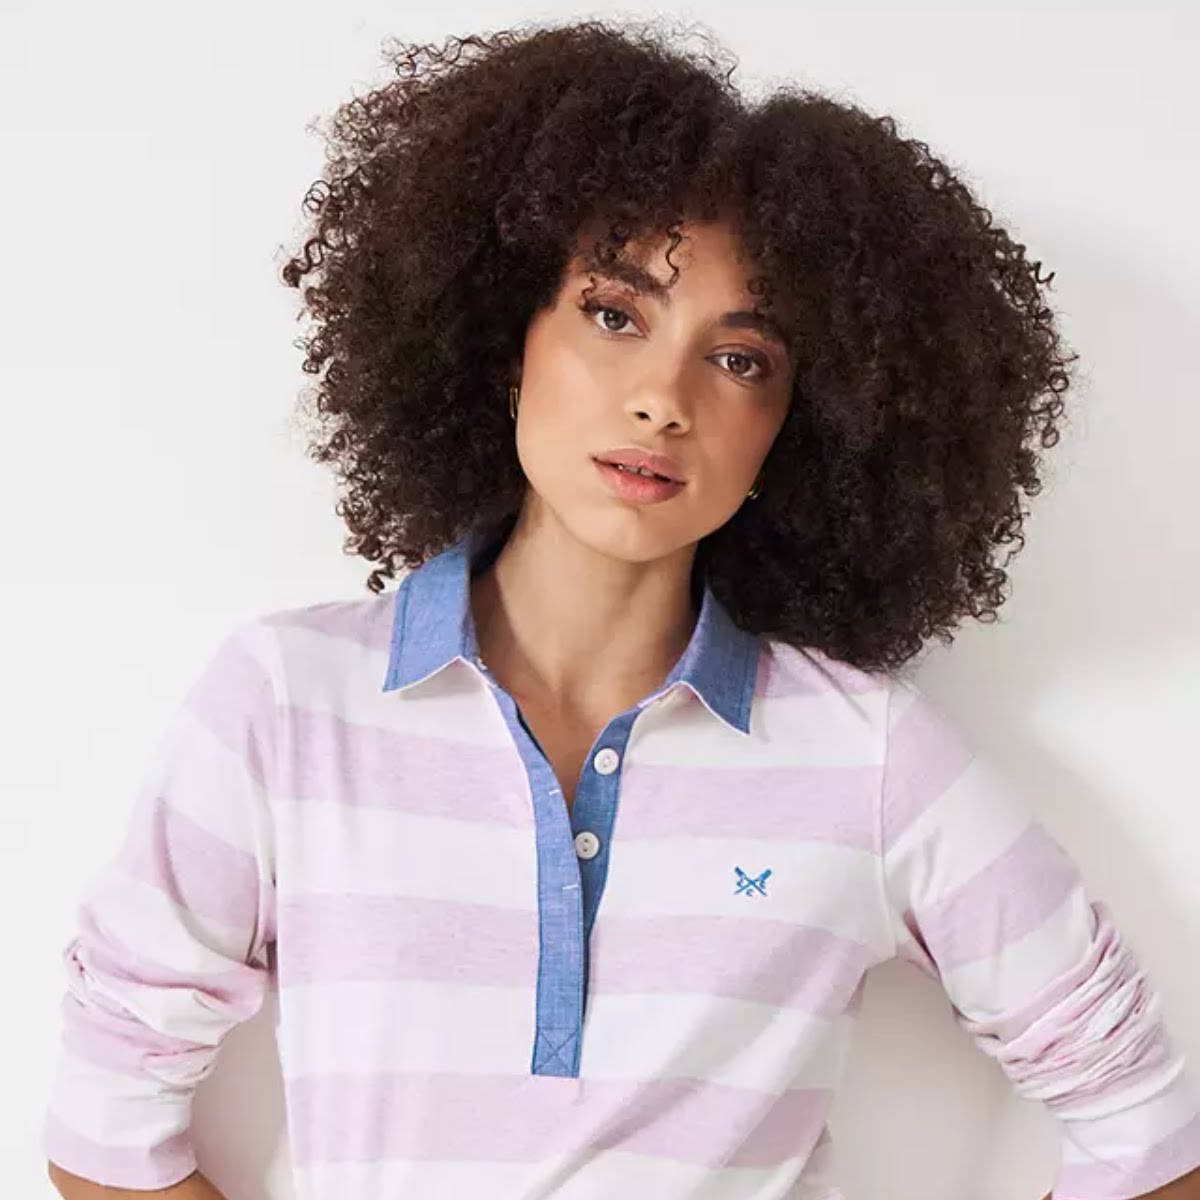 Crew Clothing Striped Cotton Rugby Top, £55, John Lewis